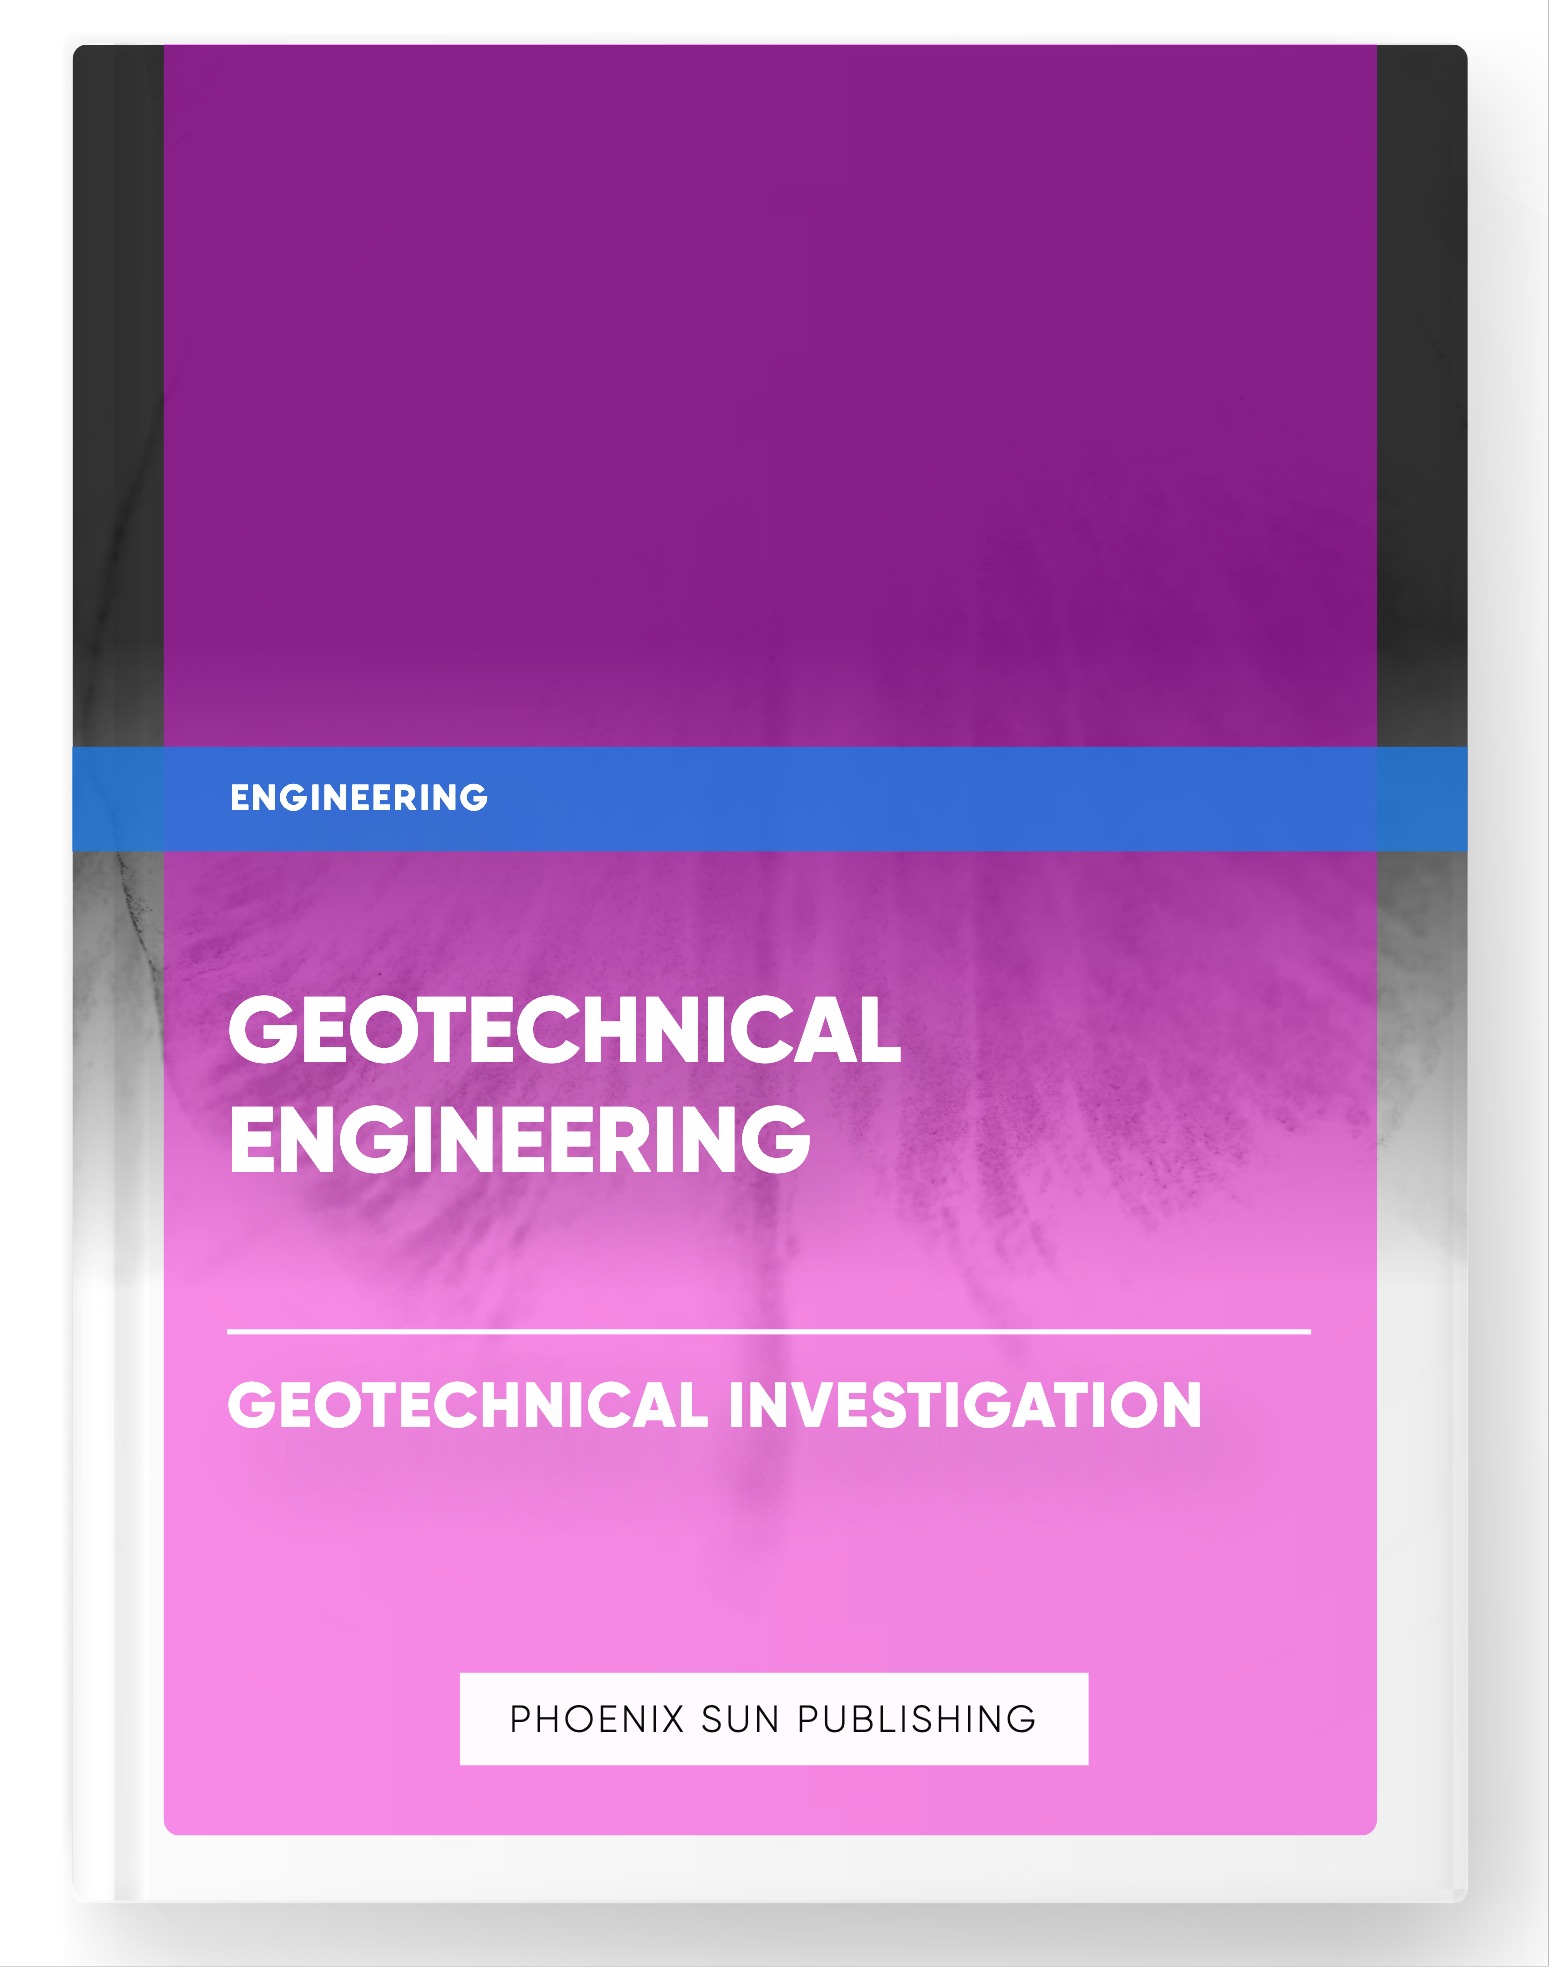 Geotechnical Engineering – Geotechnical Investigation